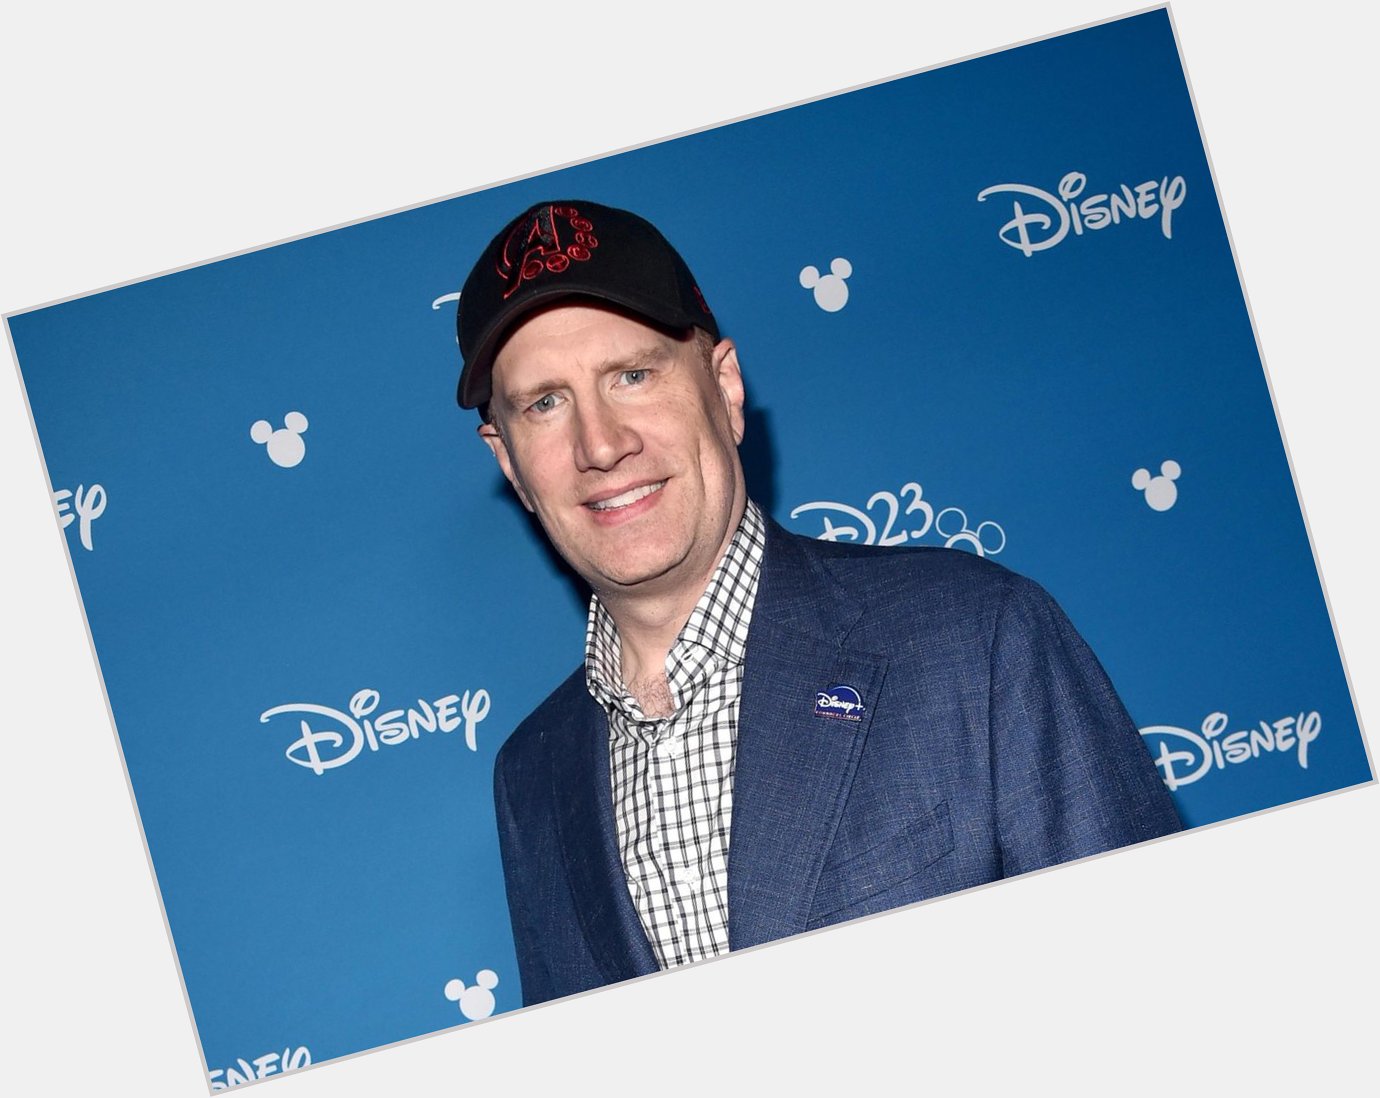 Happy 48th Birthday to Kevin Feige! The producer and president of Marvel Studios. 